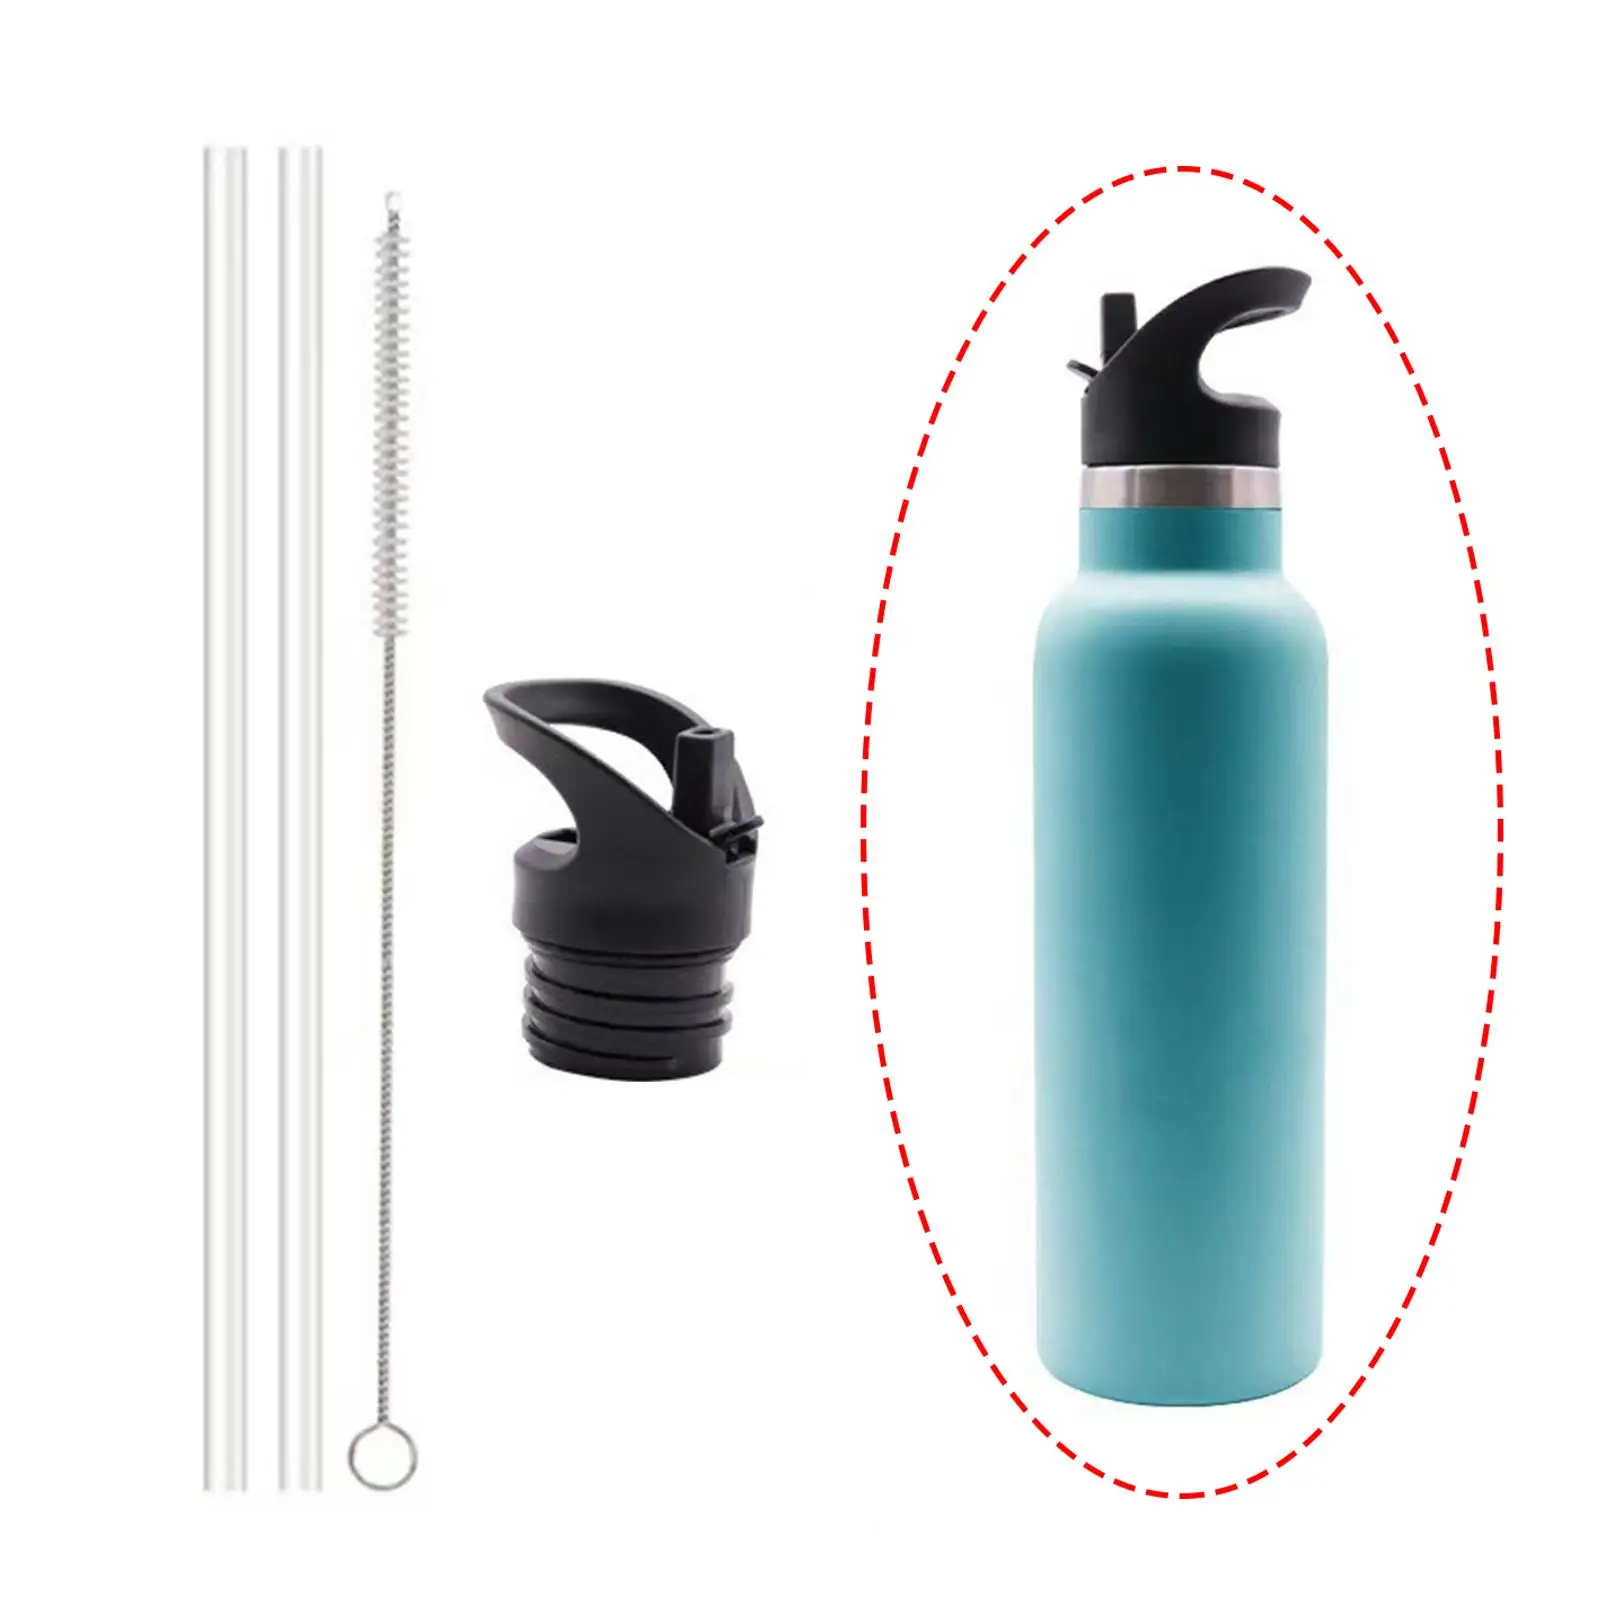 Straw Lid Simple with Straw and Brushes Replacement Cap Dust Cover Lid for Water Bottle Outdoor Standard Mouth Sports Working